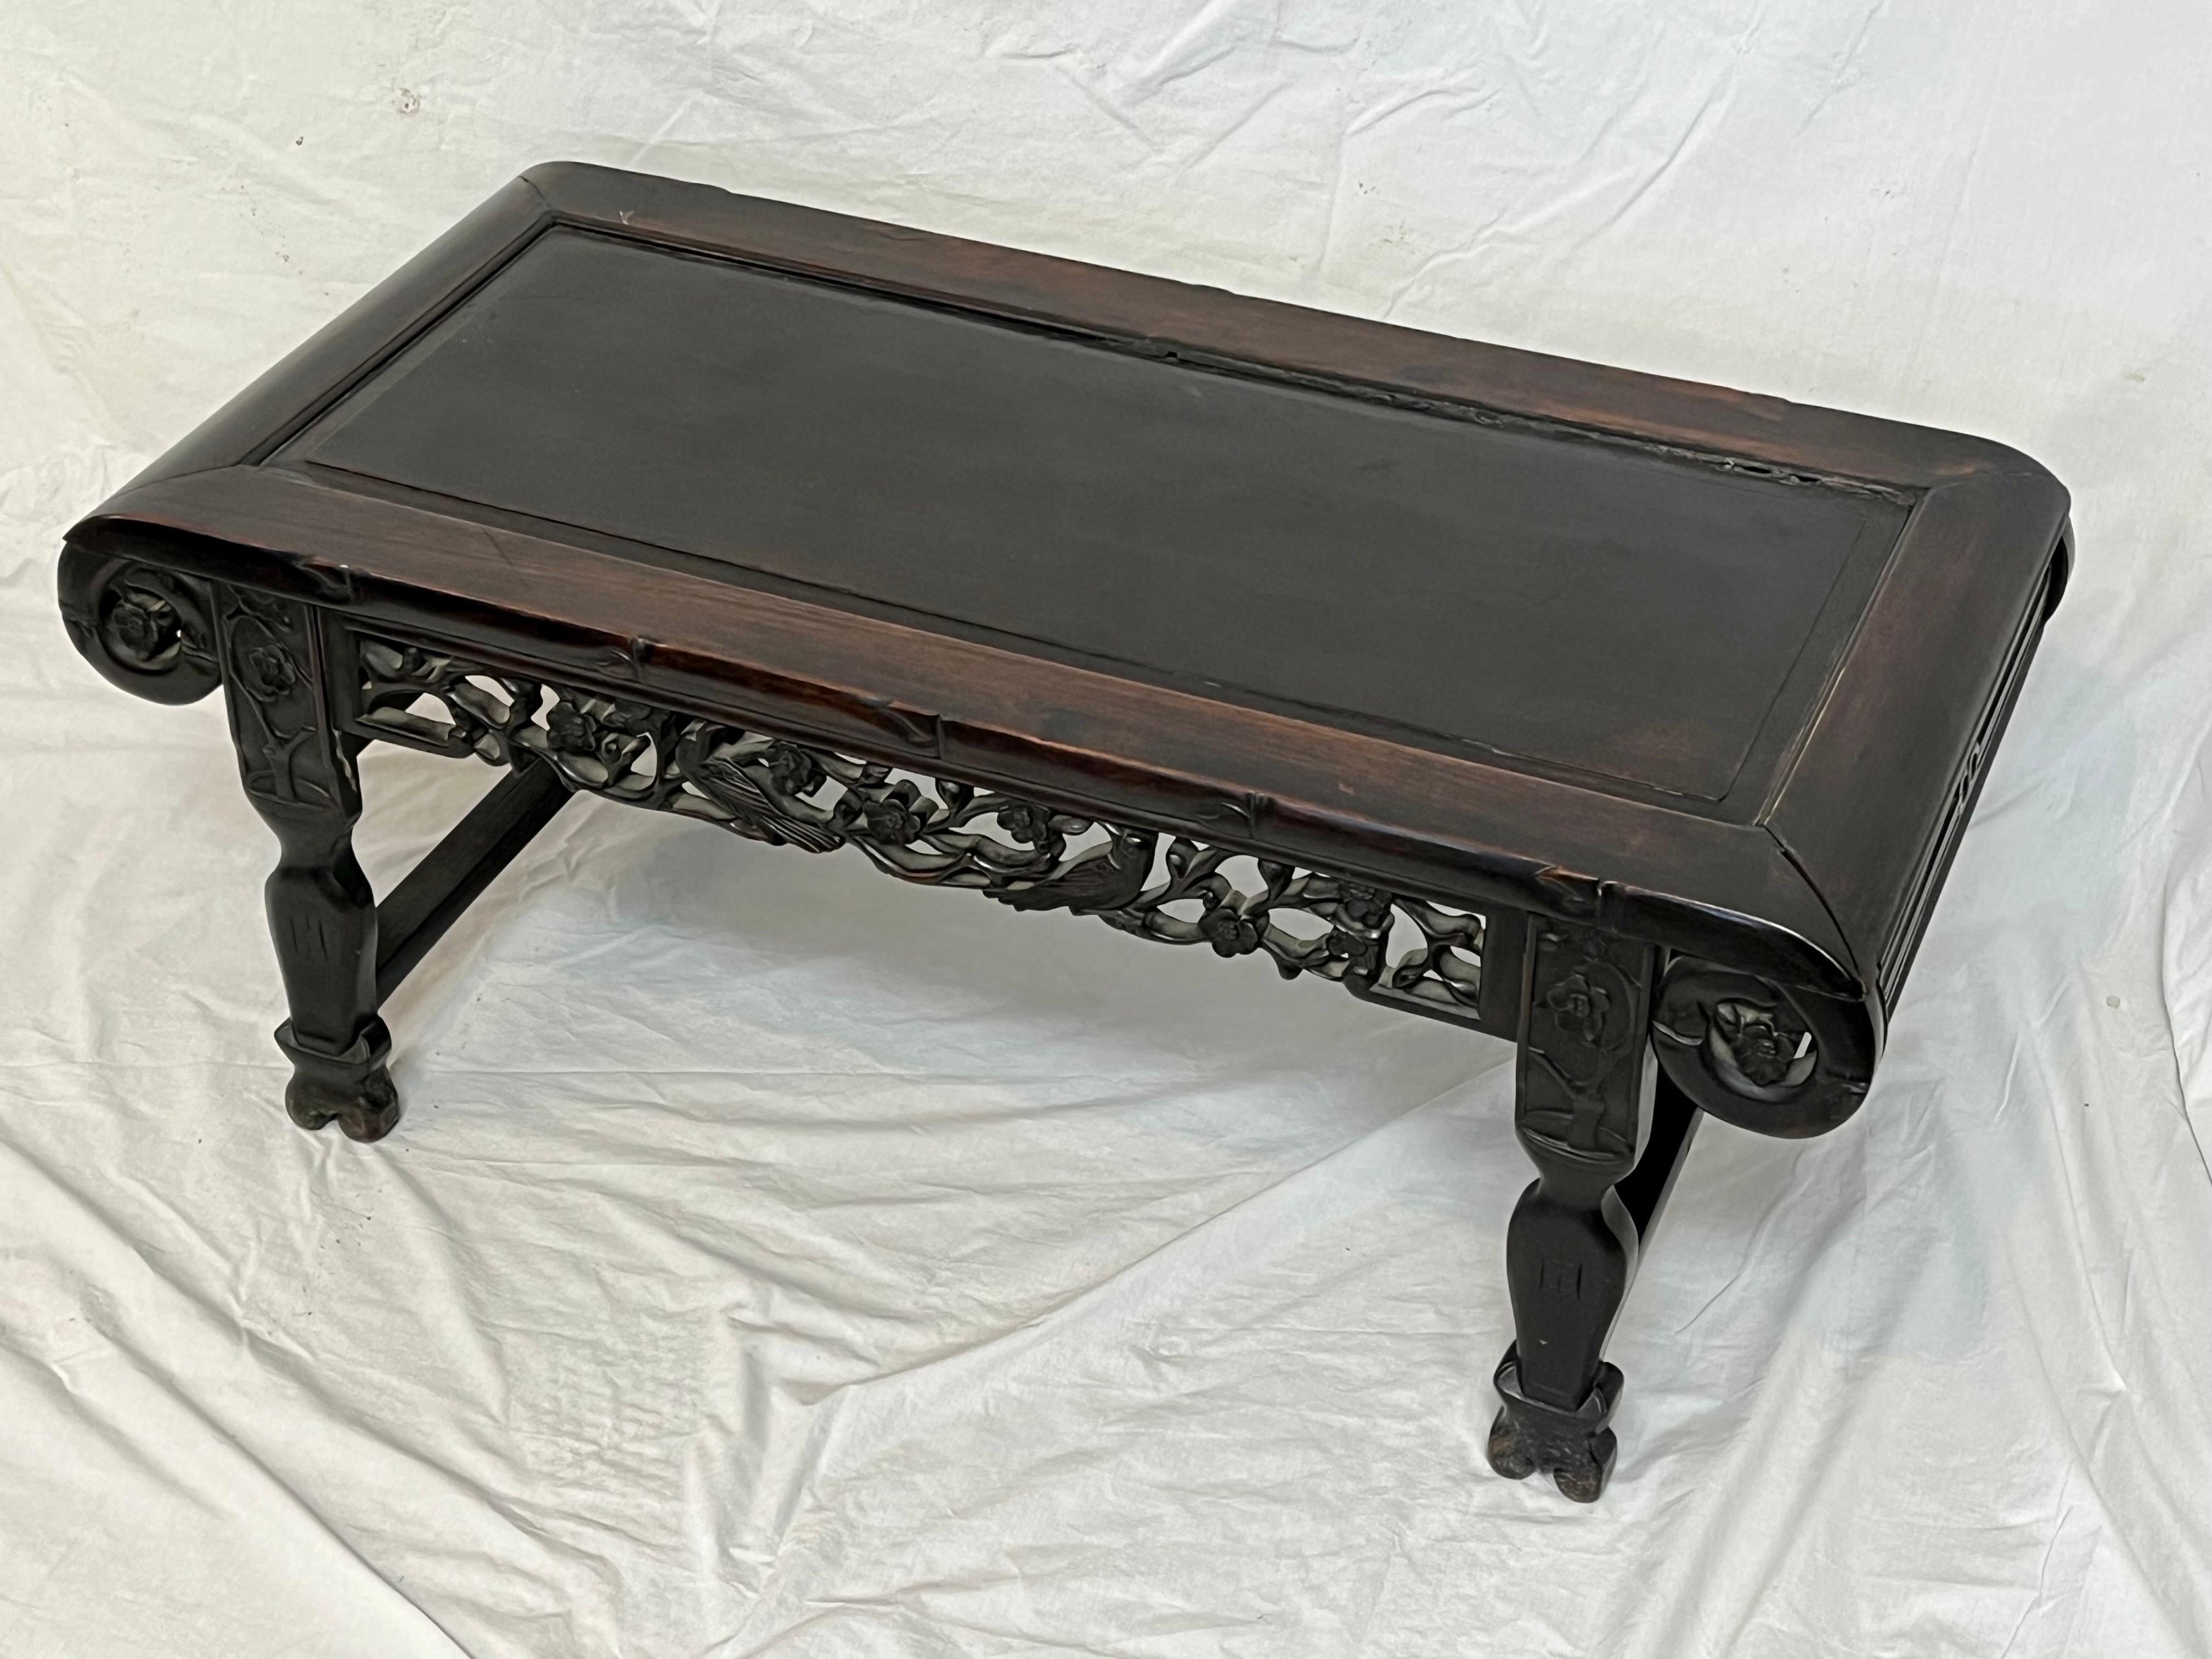 A beautiful antique Asian low table with carved and pierced fretwork, rounded, scrolling corners, sitting low on four carved legs. This table features a deep, rich patina. The flora and fauna carved into the fretwork running the sides of the table